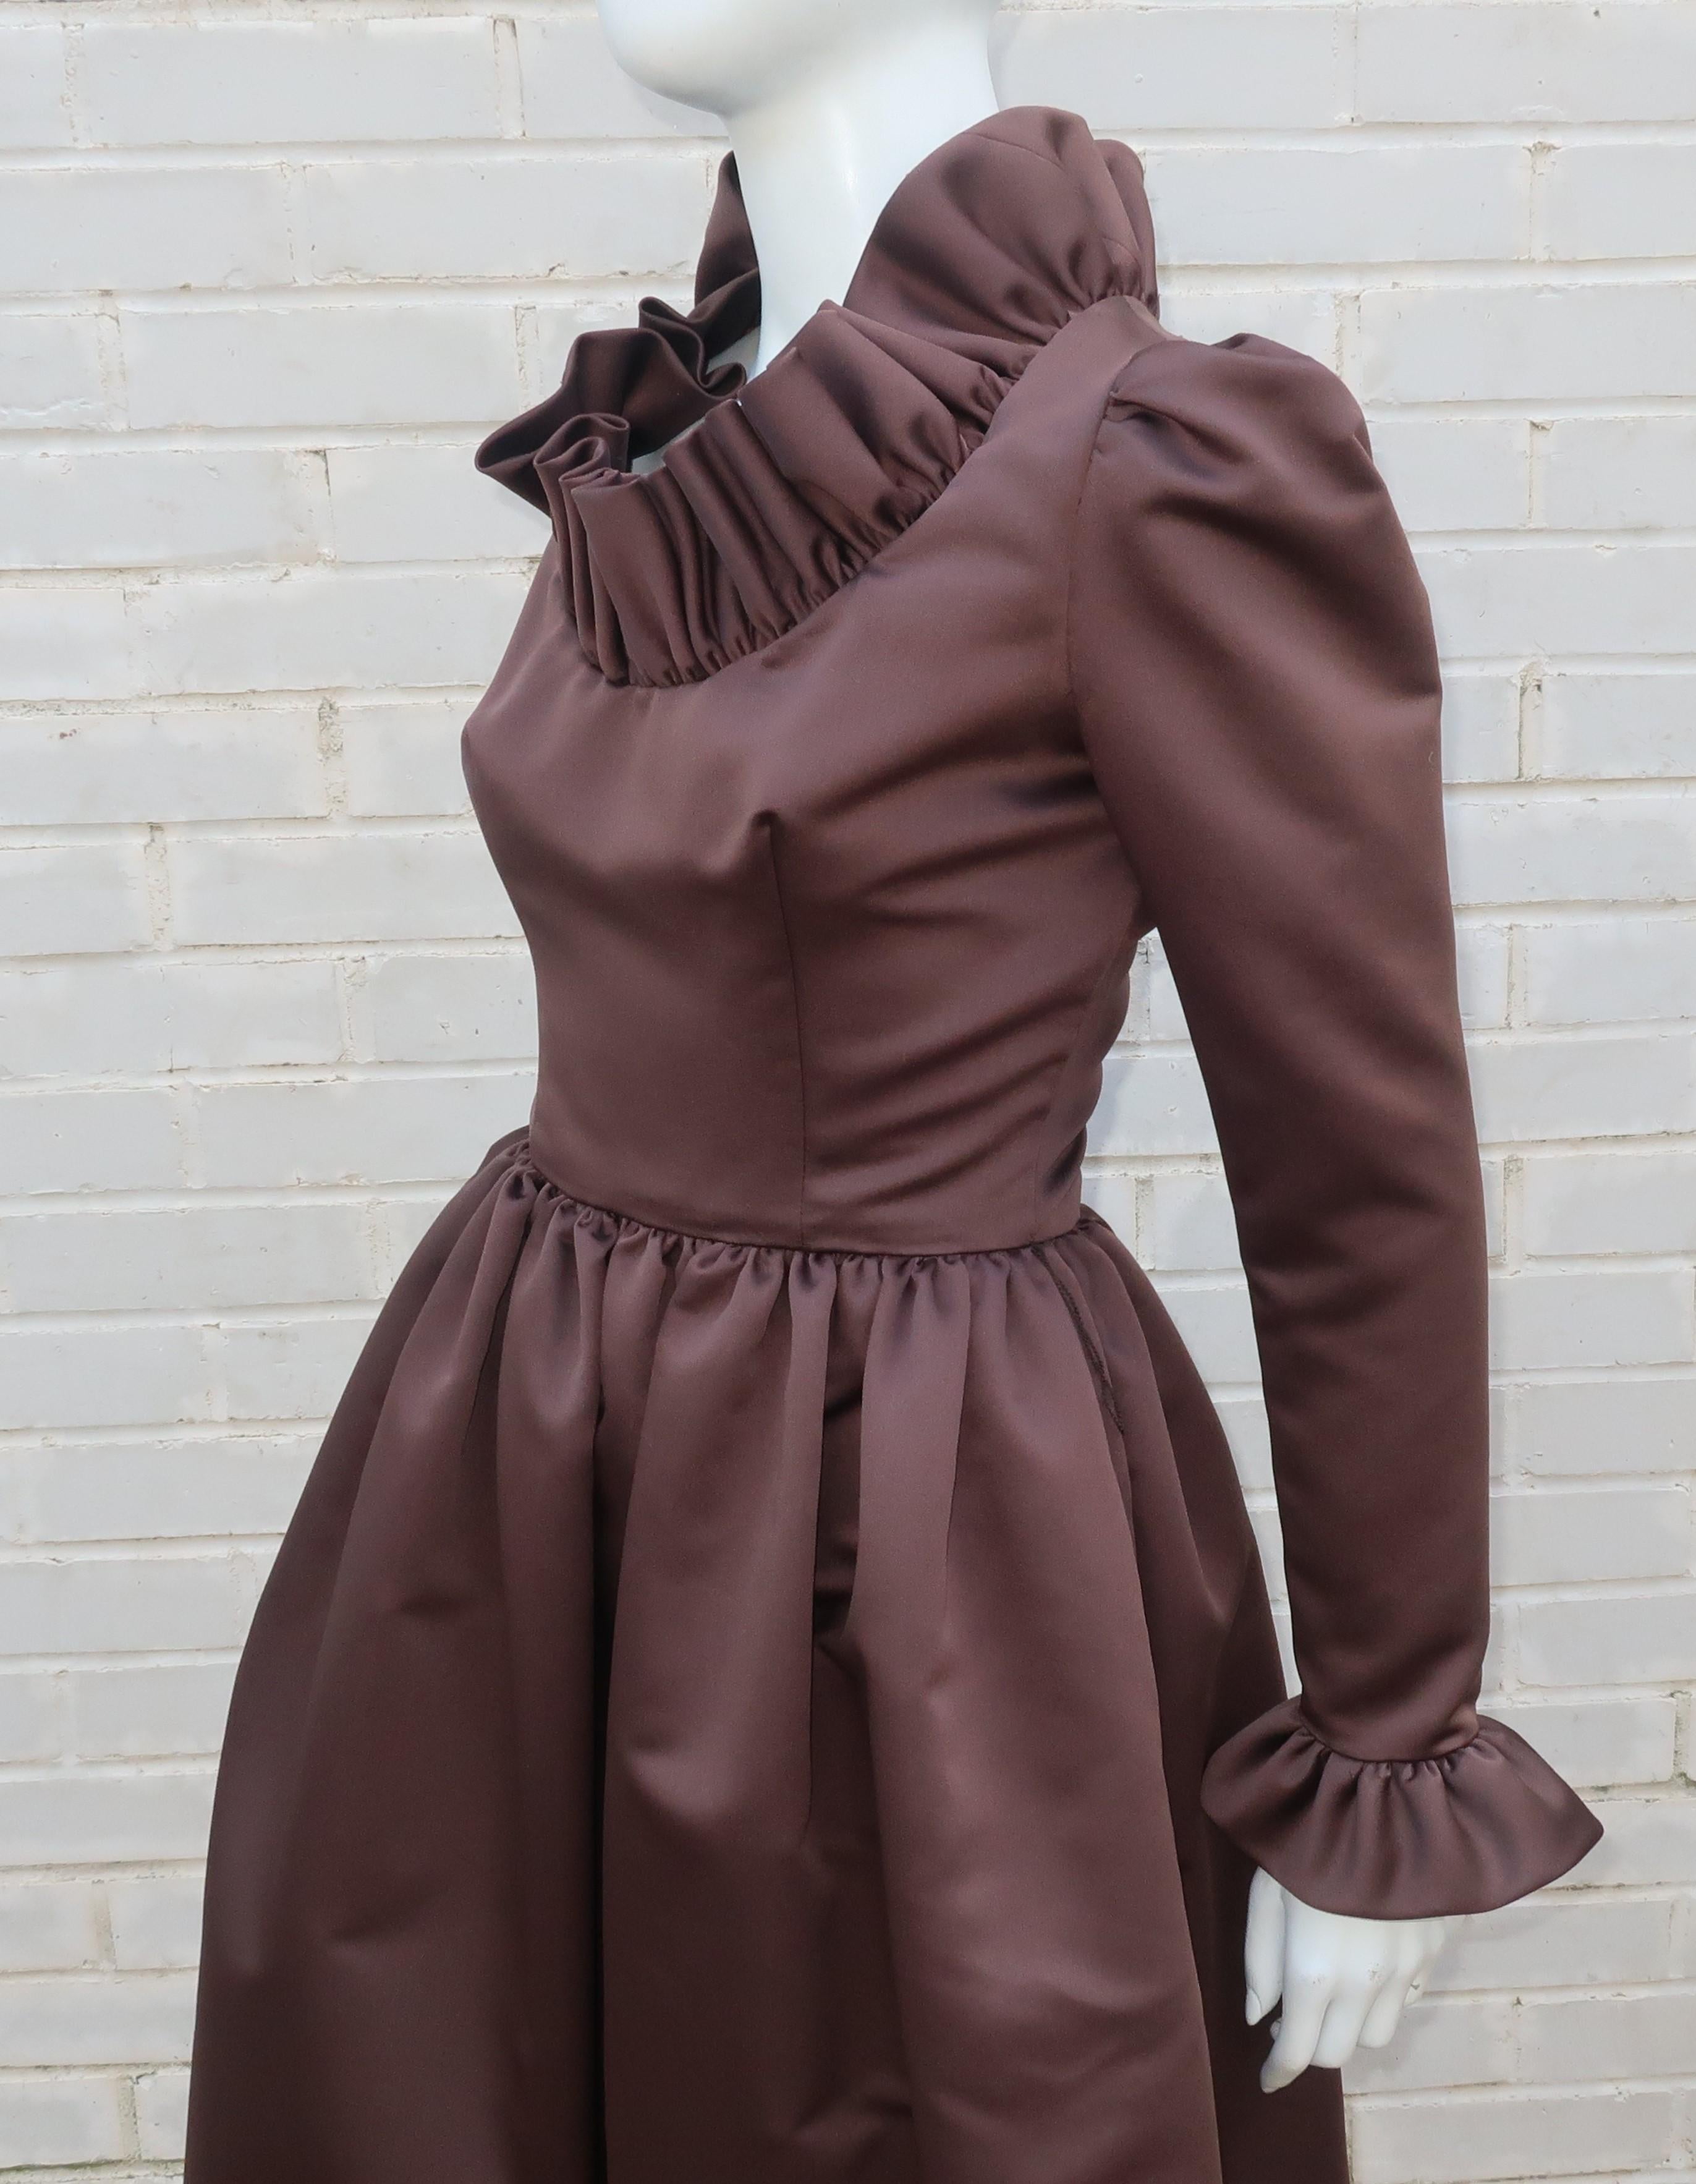 Jill Richards Brown Satin Ruffled Cocktail Dress, 1970's For Sale 3